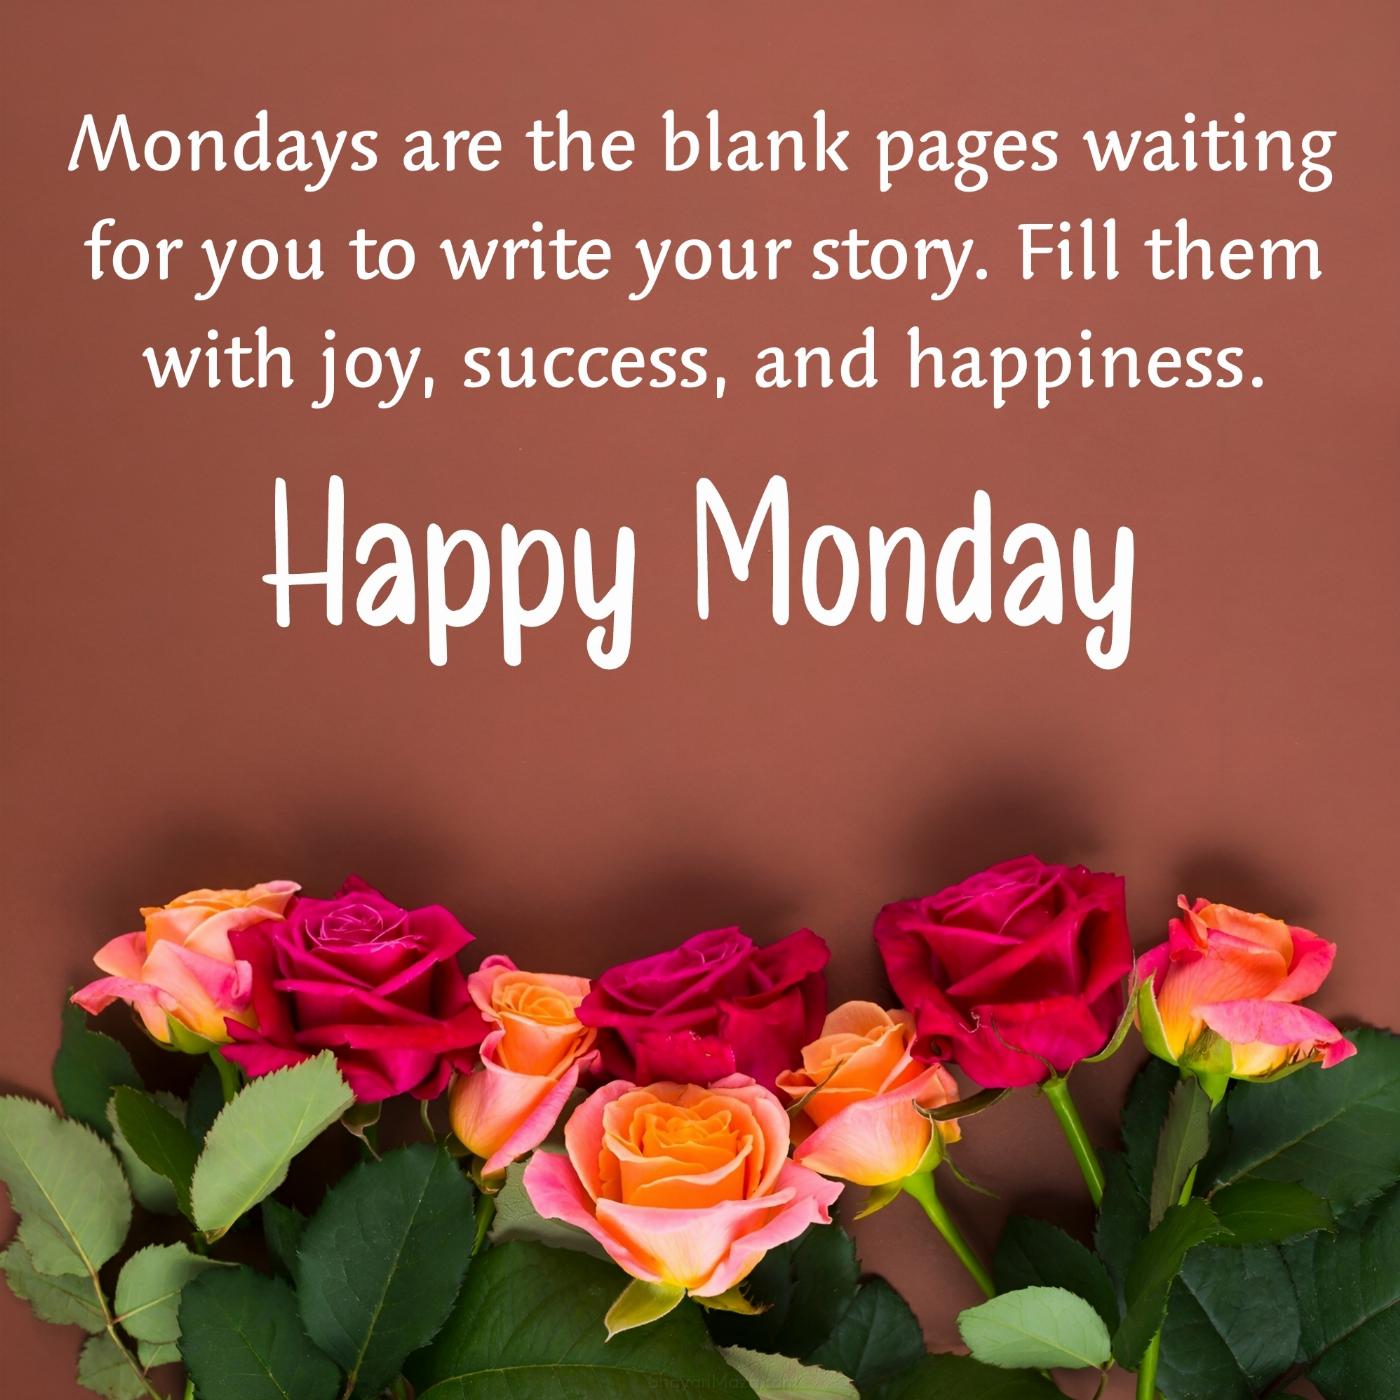 Mondays are the blank pages waiting for you to write your story